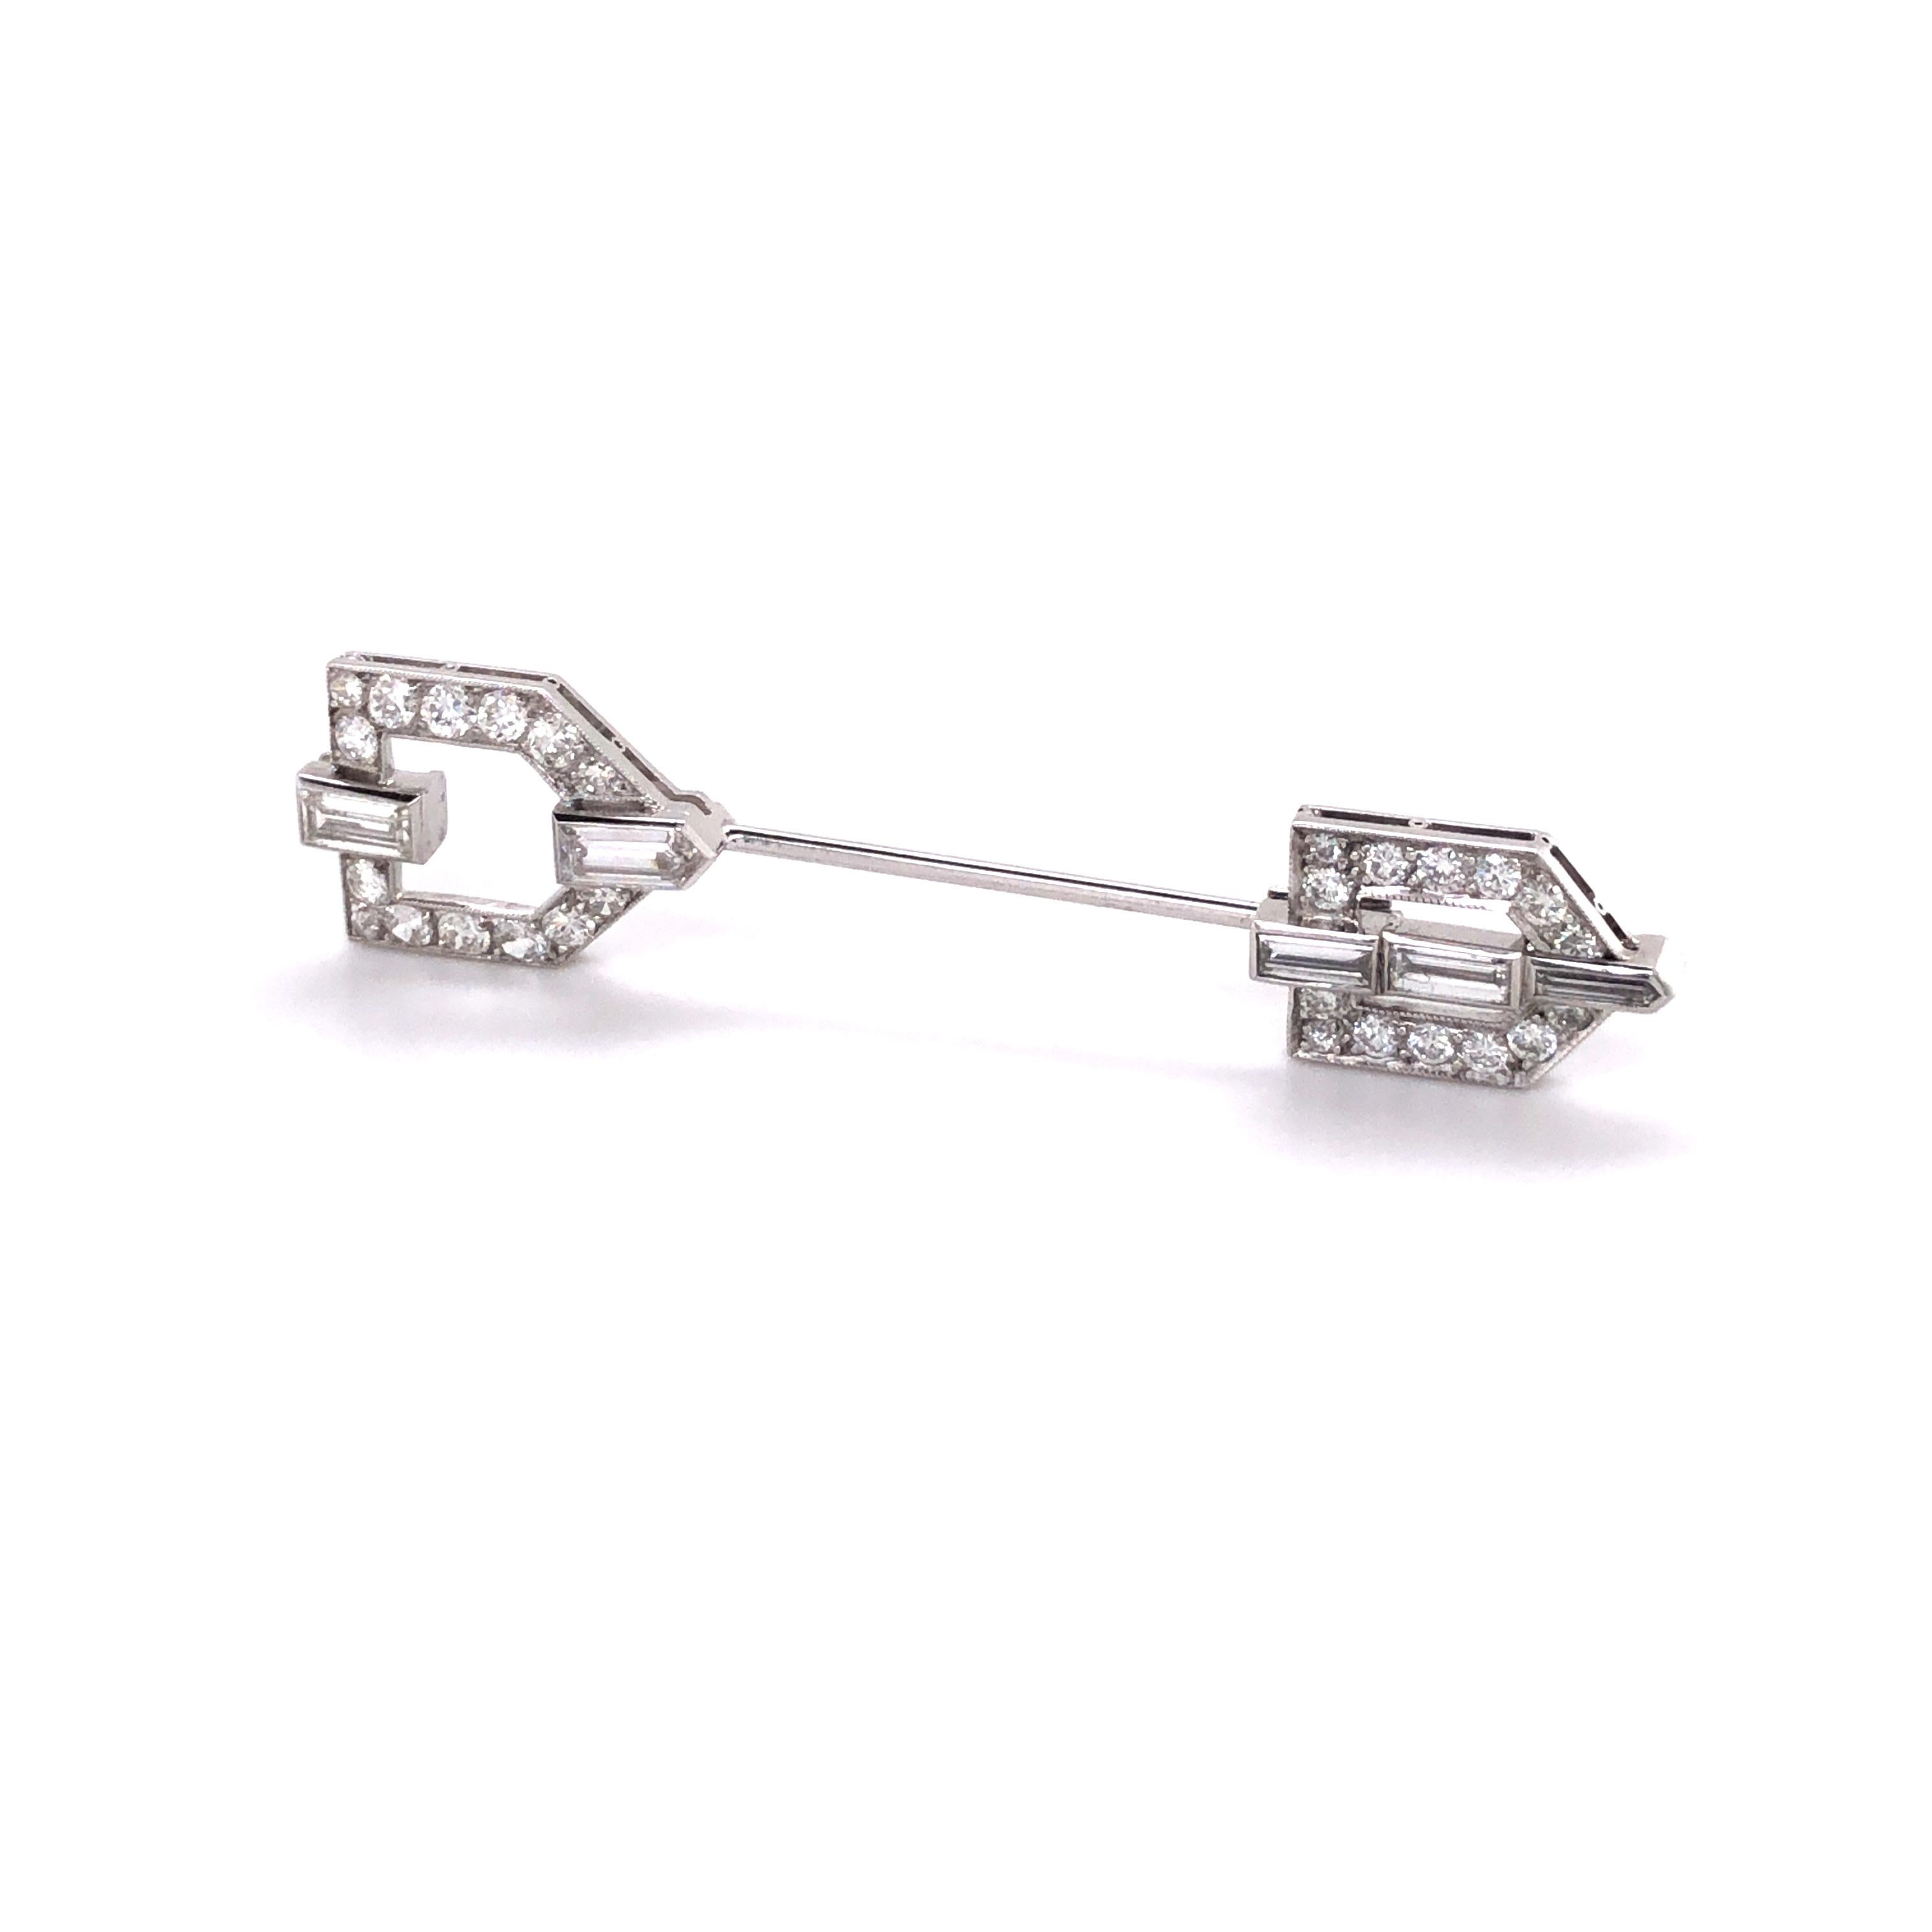 This arrow shaped jabot pin is an exquisite example of Art Deco jewellery.
With its geometric shape, both in terms of the outer form and the diamond cuts, the pin still looks as modern today as it did when it was made.
The pin is composed of two